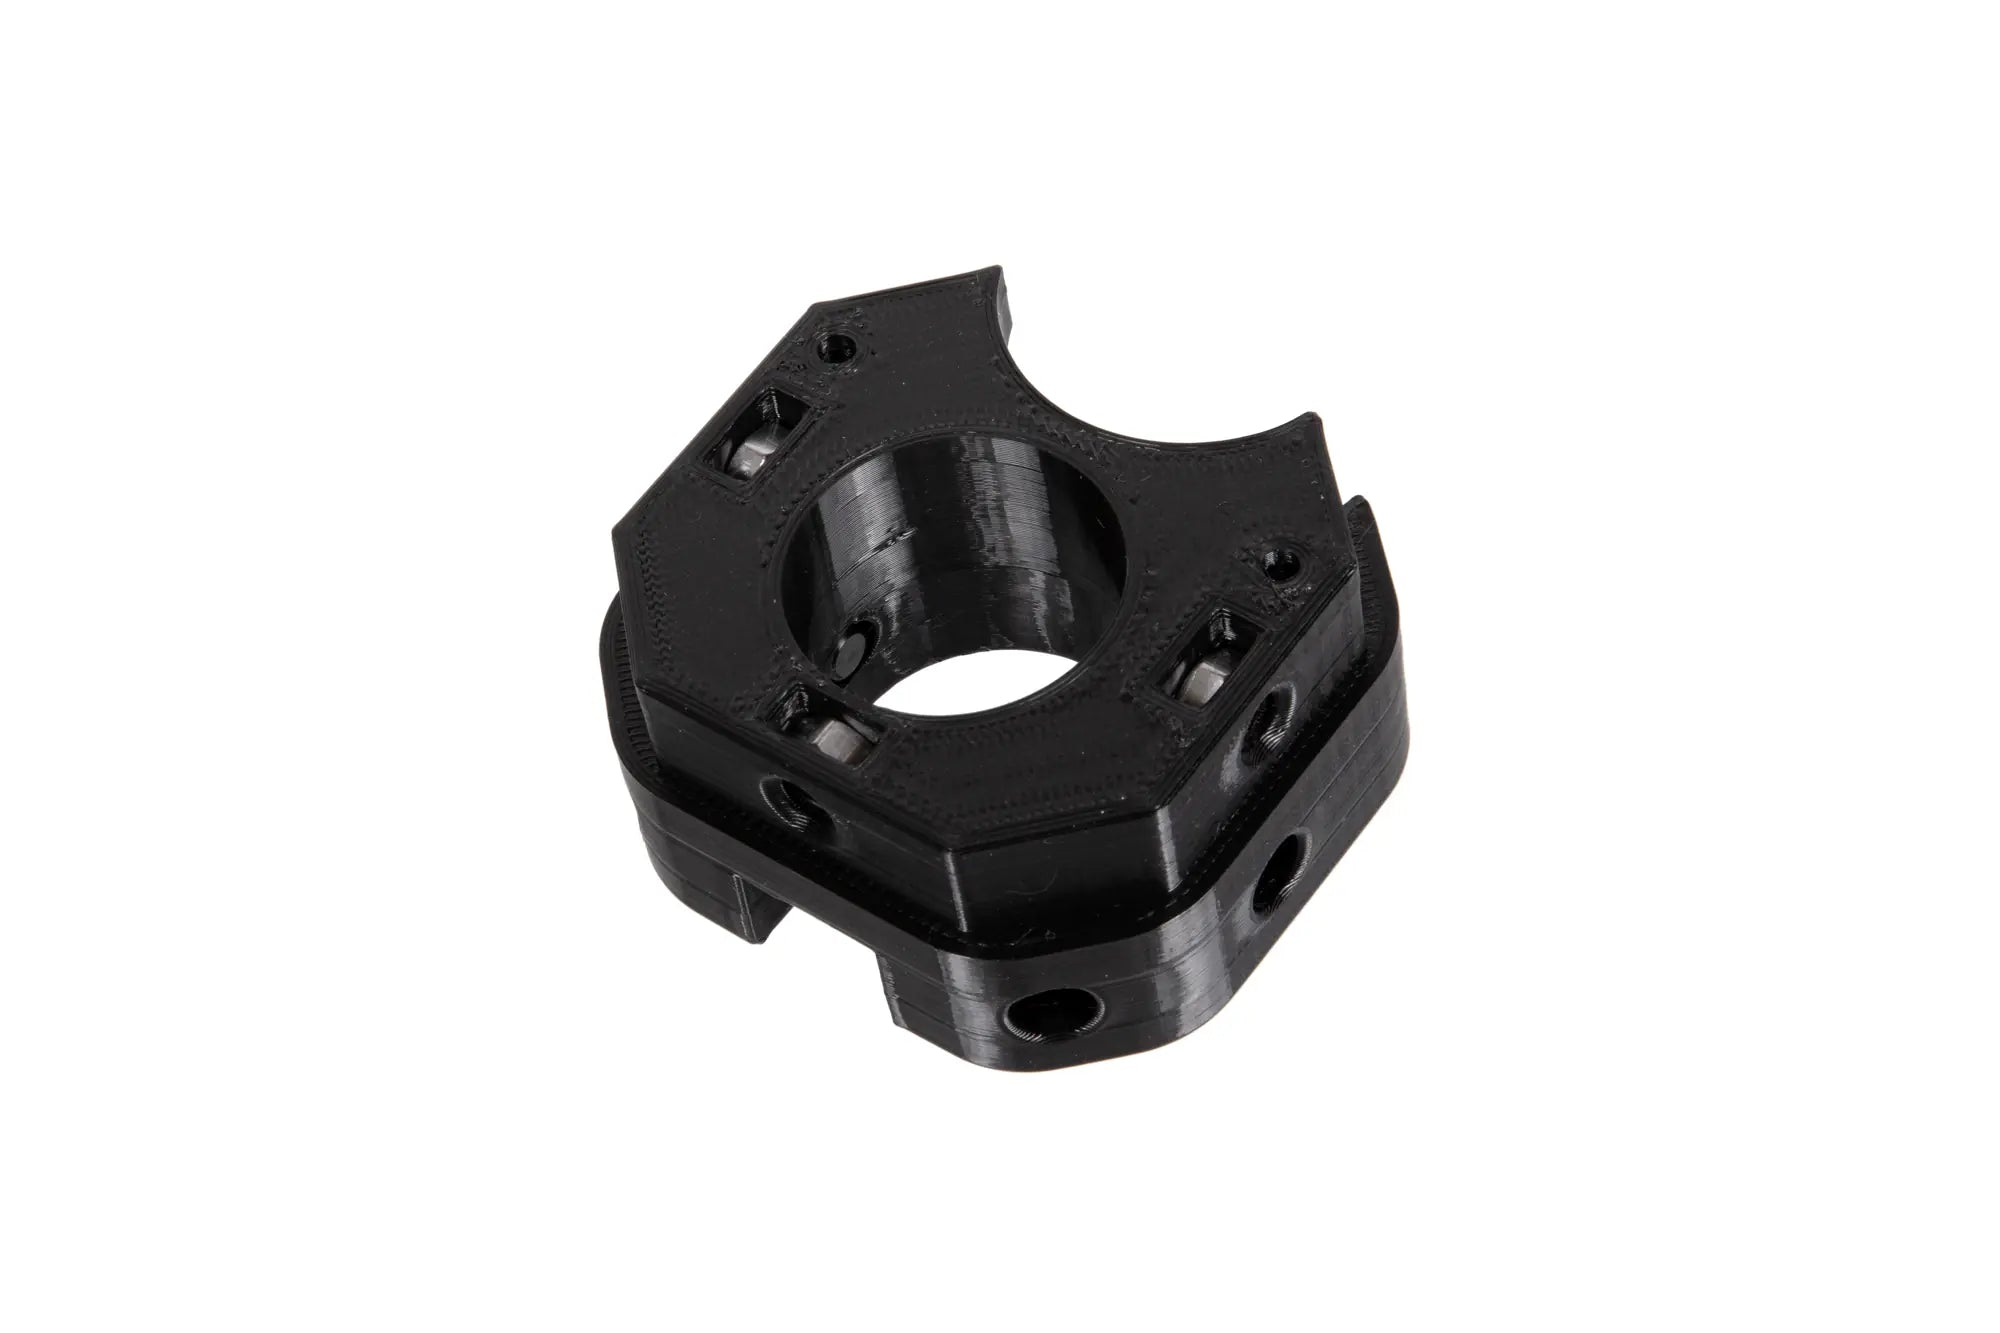 Shotgun Tracer Adapter for Replicas with Fixed Front Sight PCU 3D